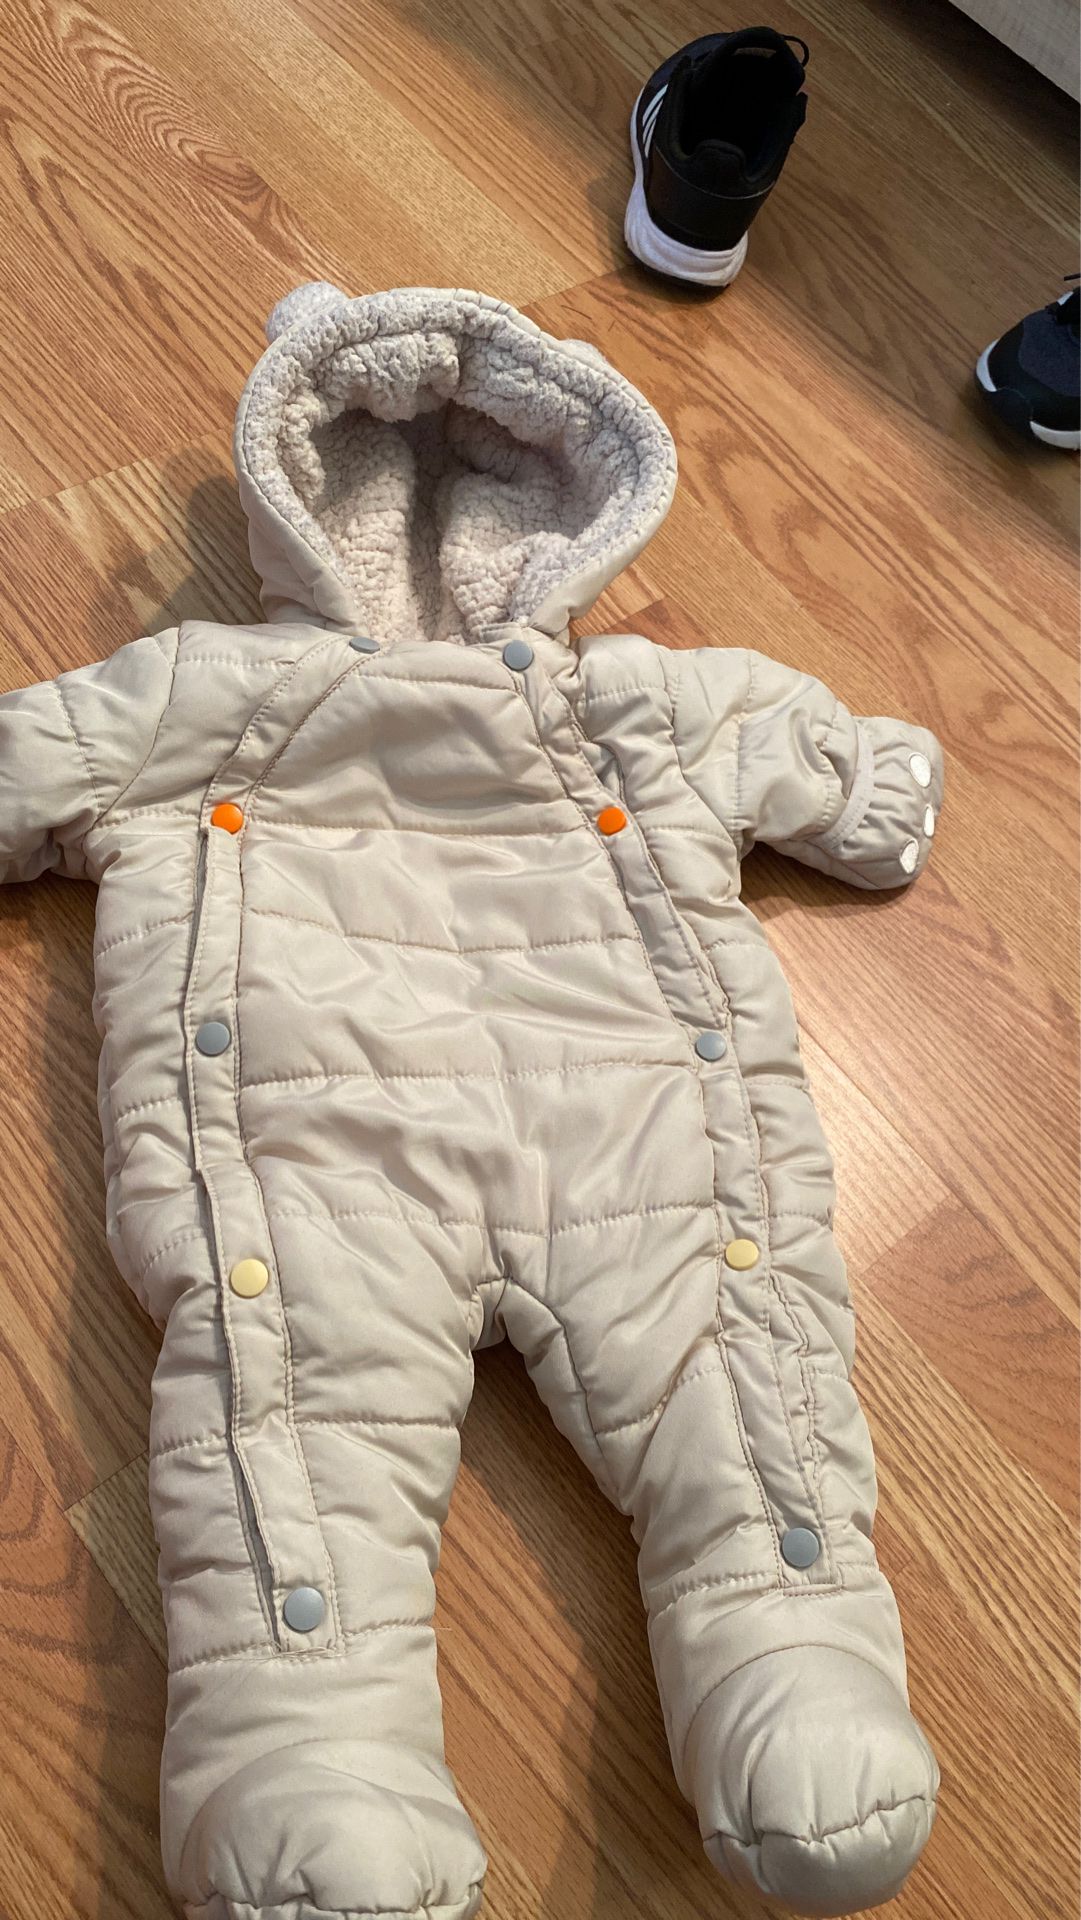 Baby Boy size 6 months winter suit